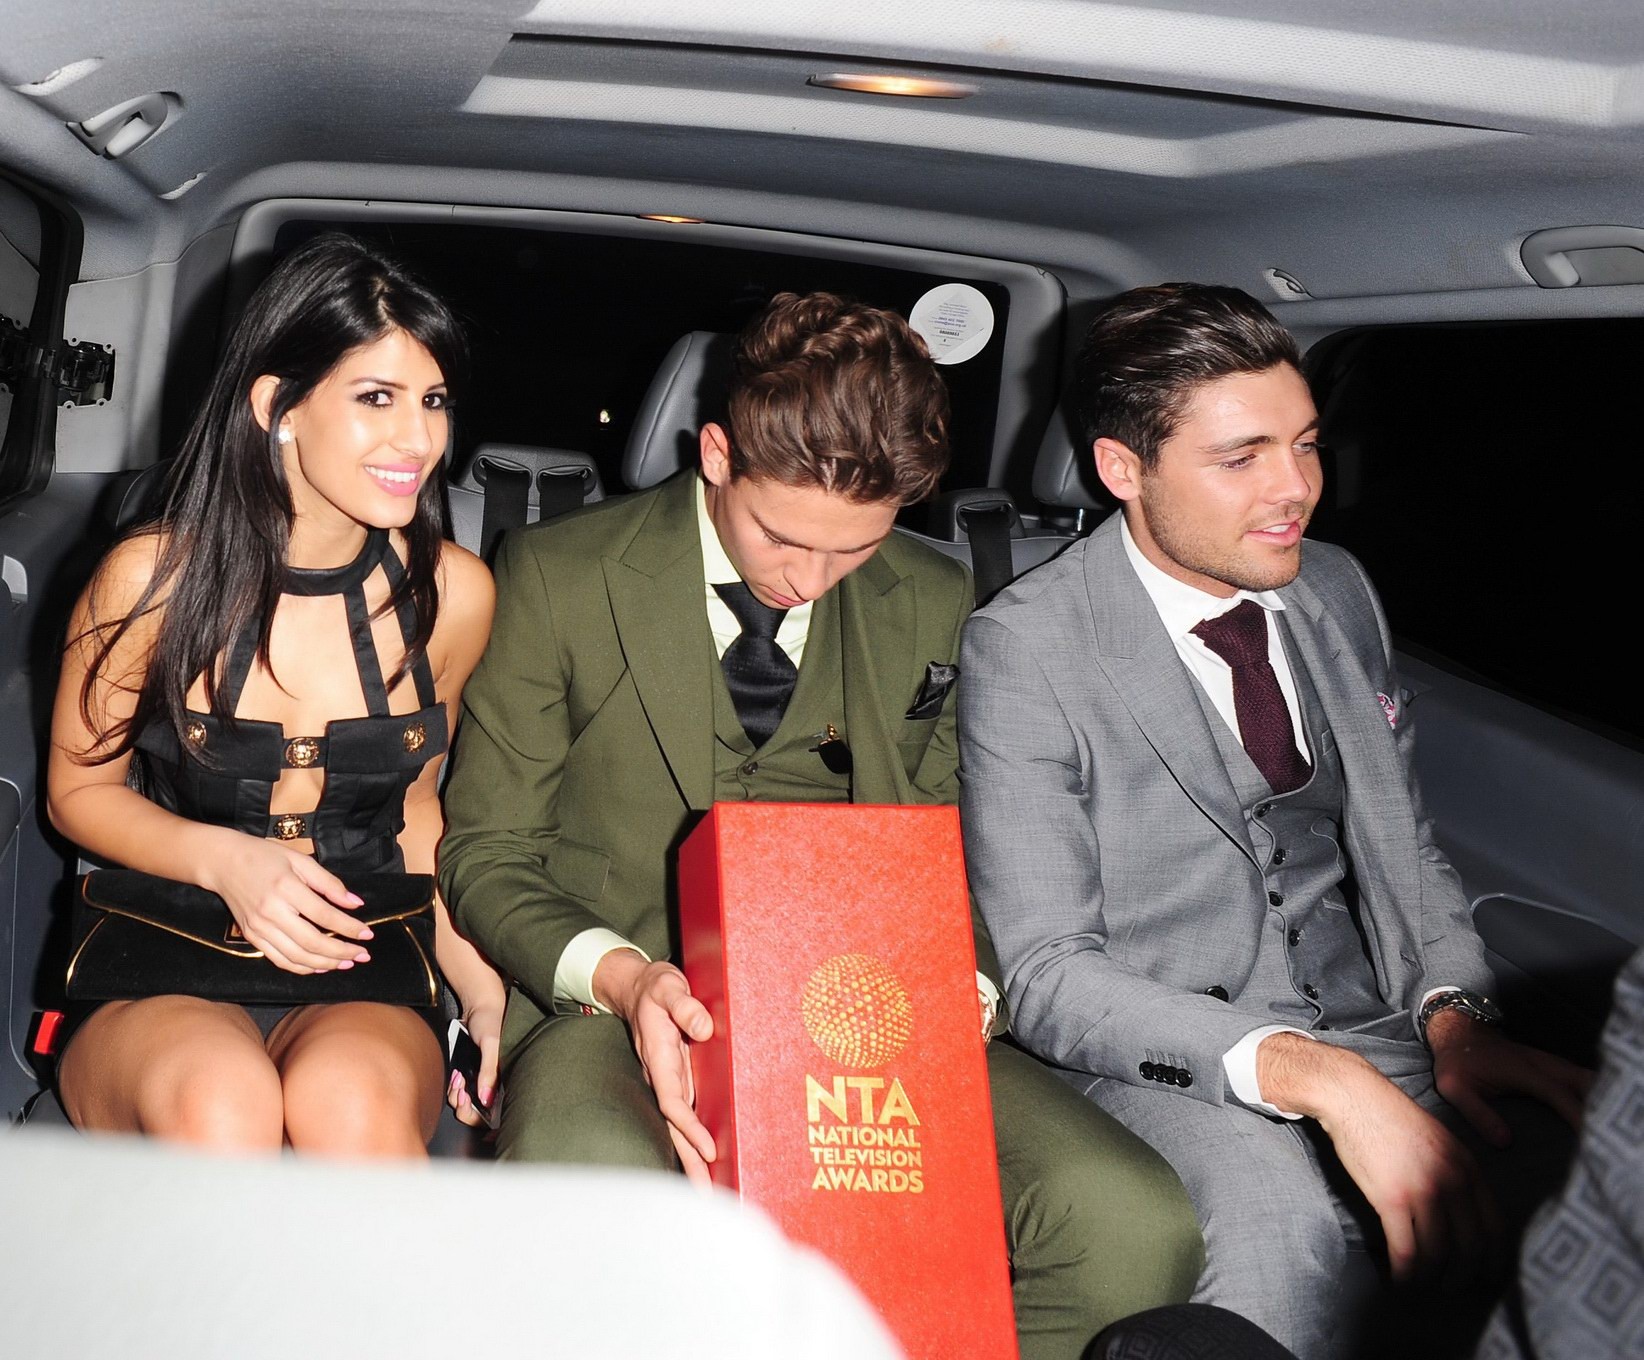 Jasmin Walia flashing her panties after the NTA After Party in London #75206055